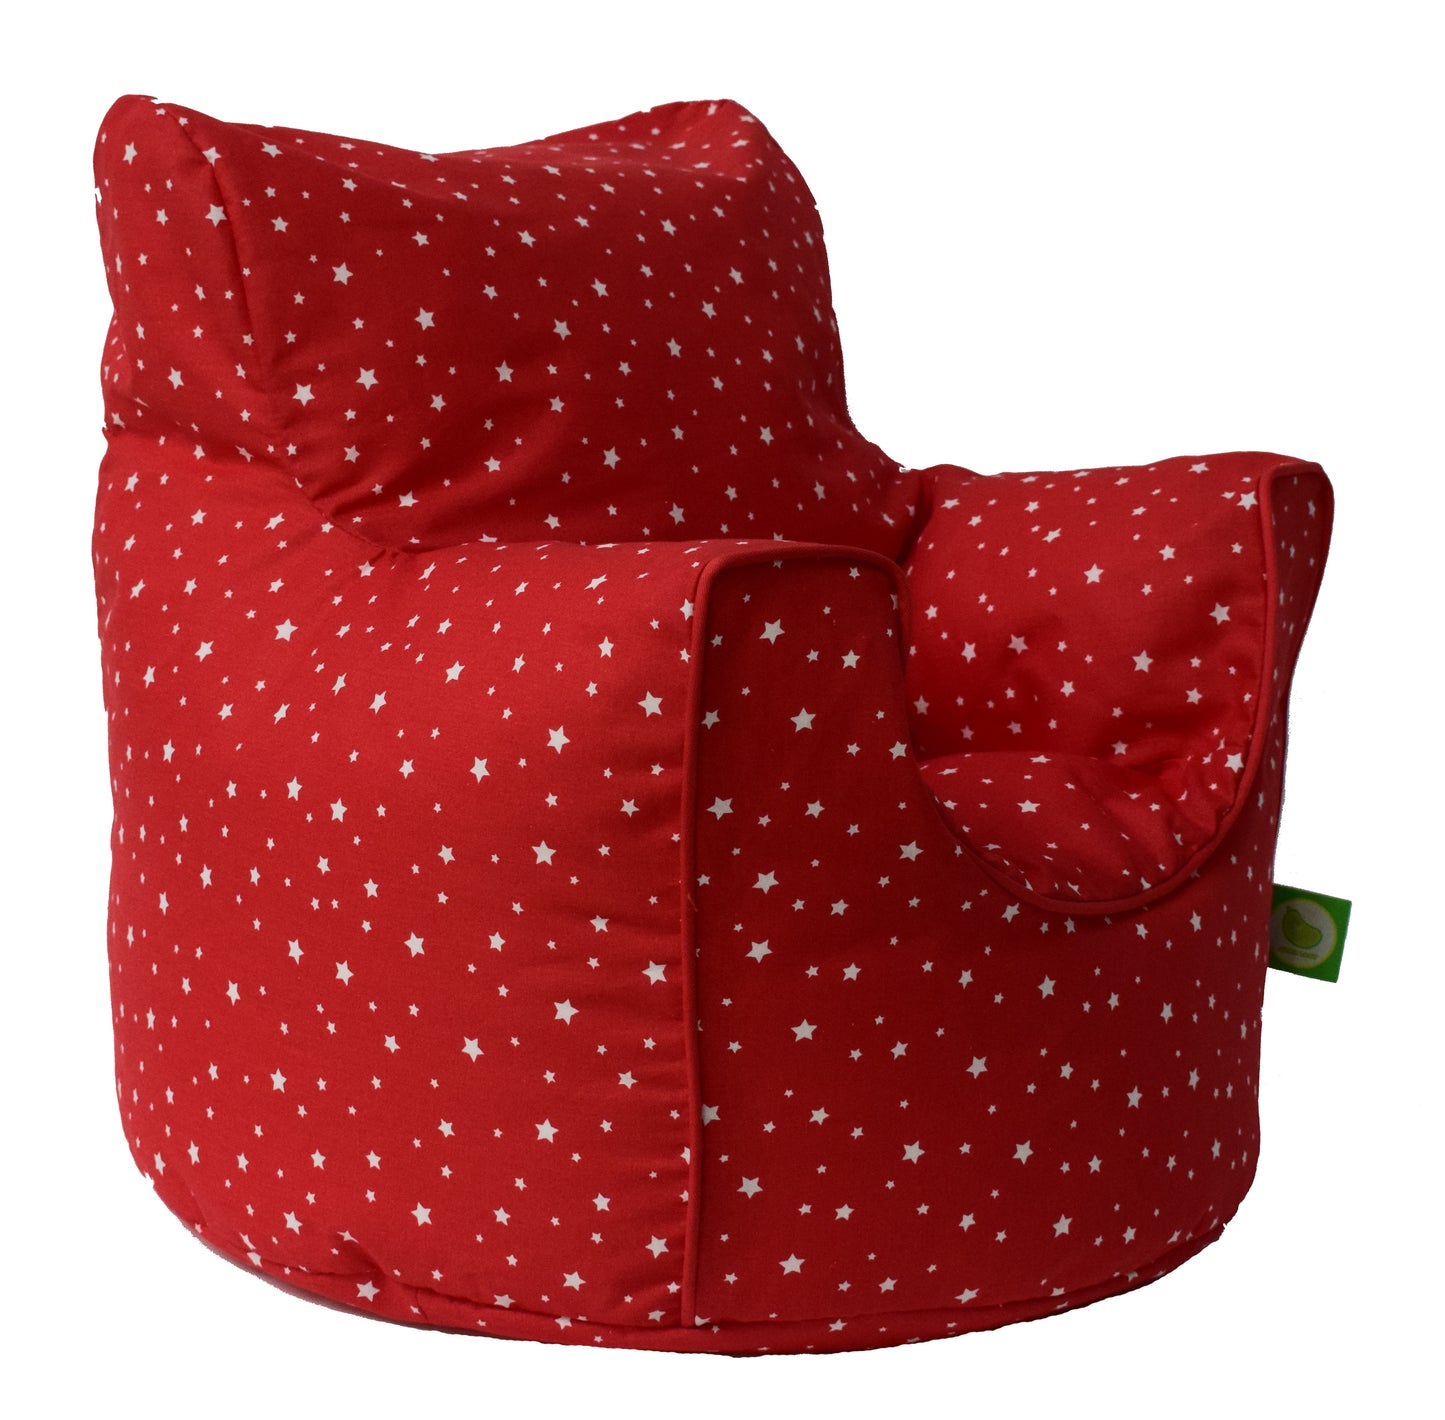 Cotton Red Stars Bean Bag Arm Chair with Beans Child / Teen size